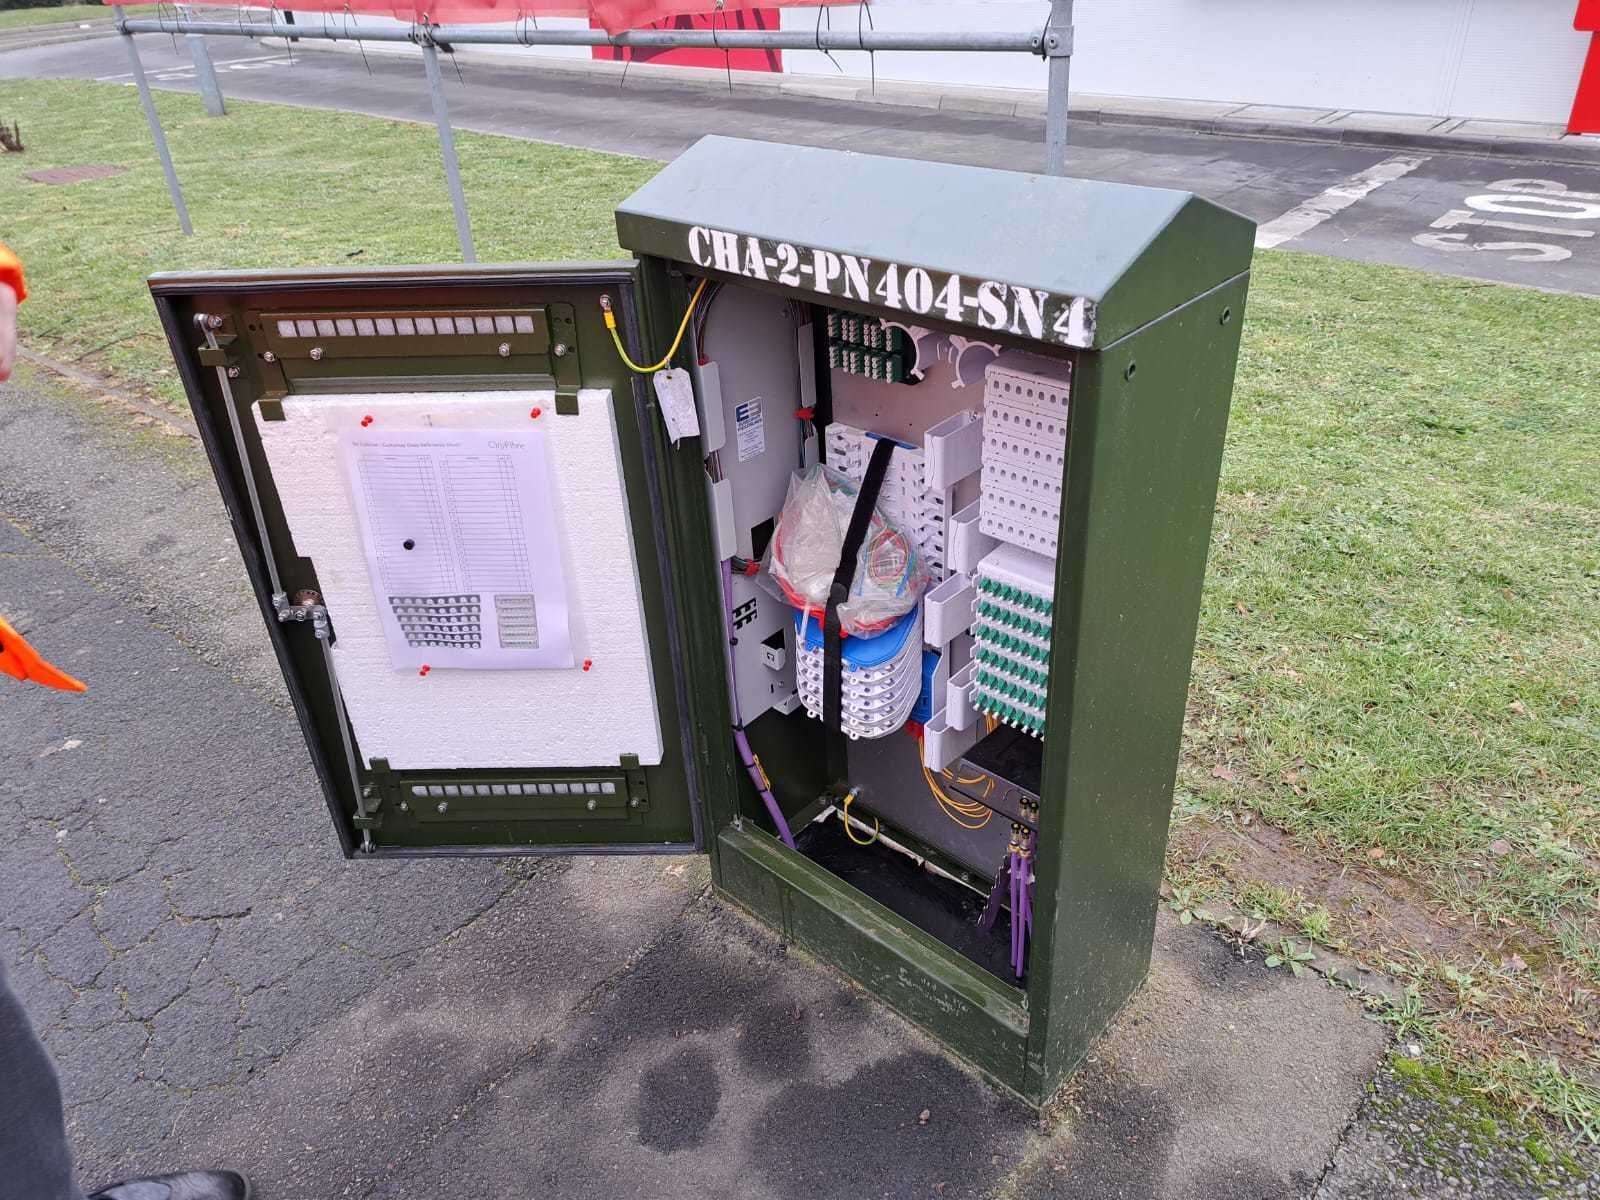 A cabinet, also known as a secondary node, which CityFibre uses to connect broadband to local houses, businesses and other premises